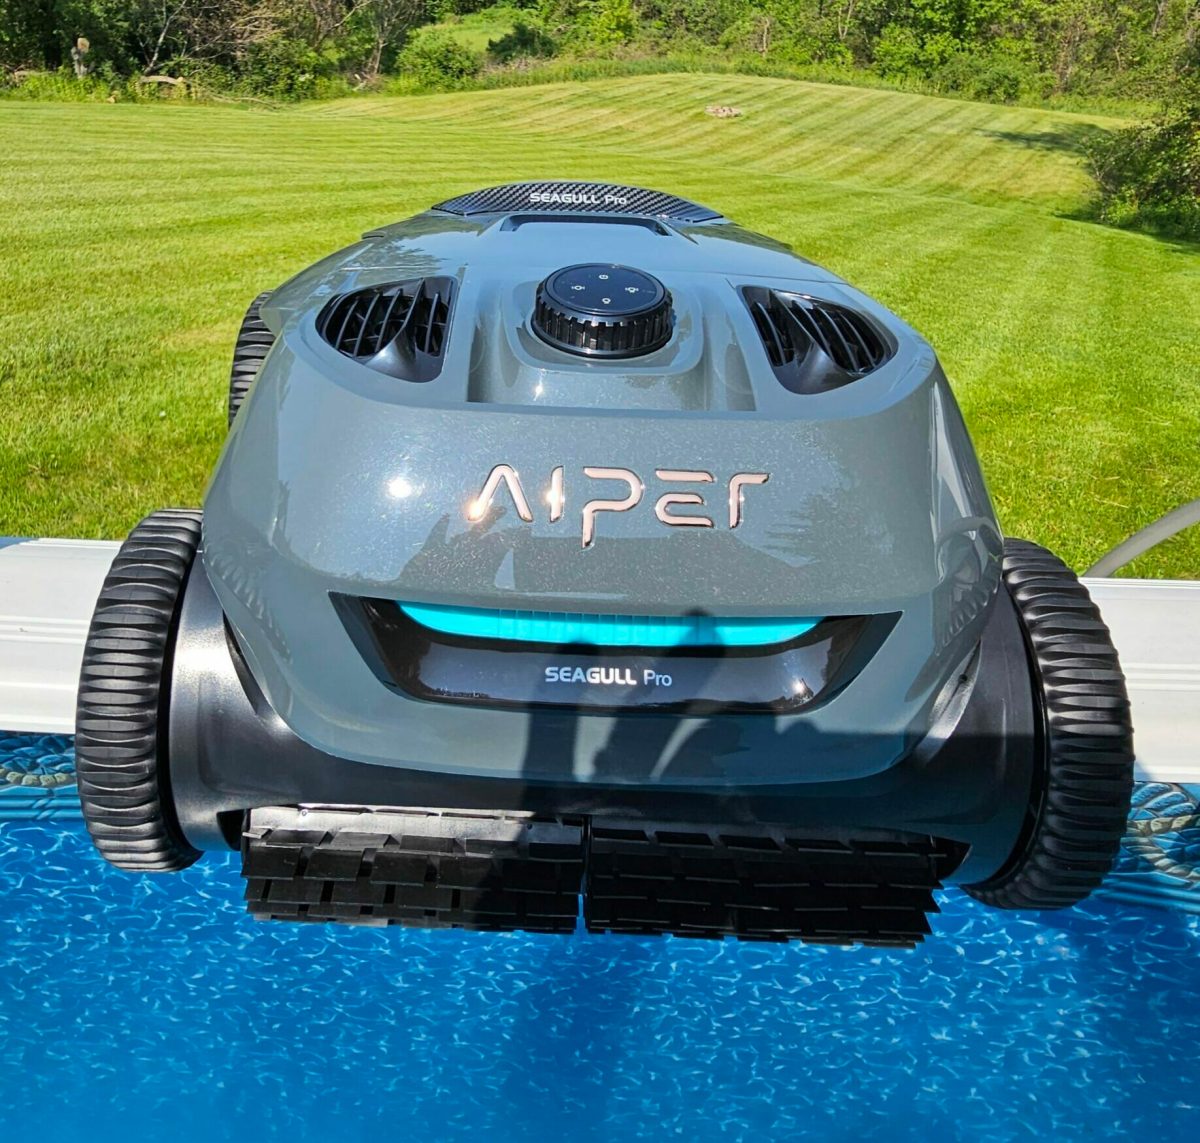 Close up of Apier Seagull robotic pool cleaner